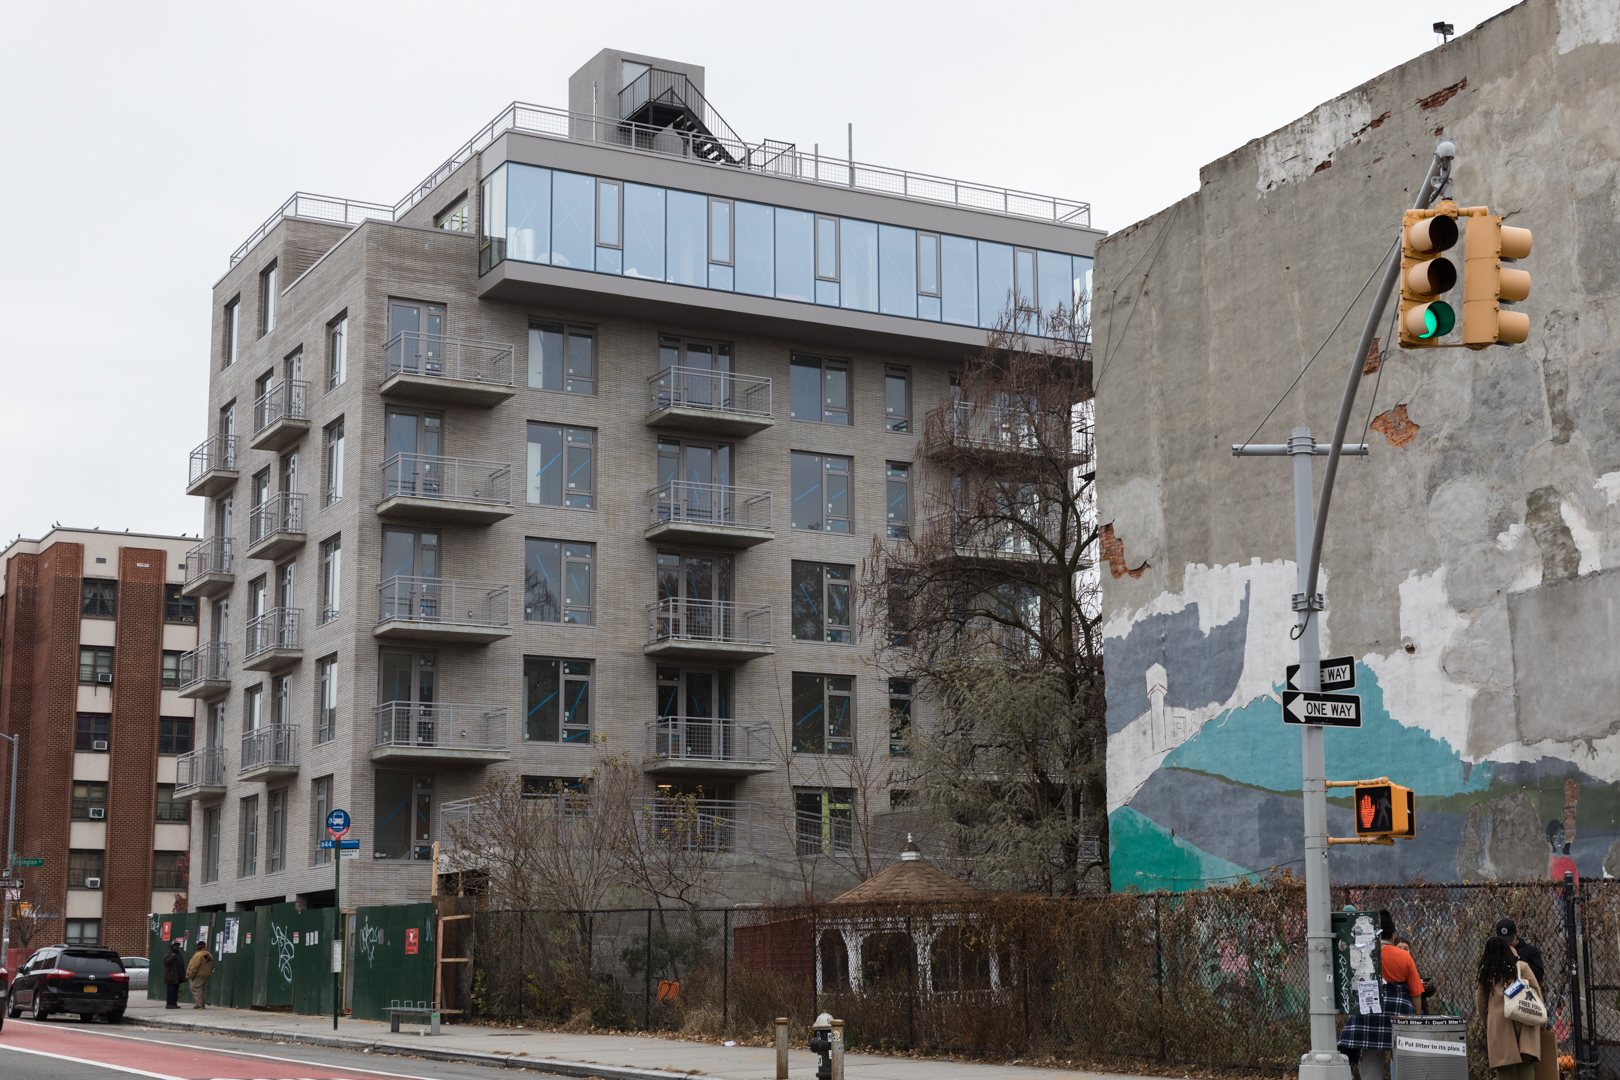 The luxury apartment building is situated in the heart of gentrifying Bedford-Stuyvesant. Photo: Paul Frangipane/Brooklyn Eagle